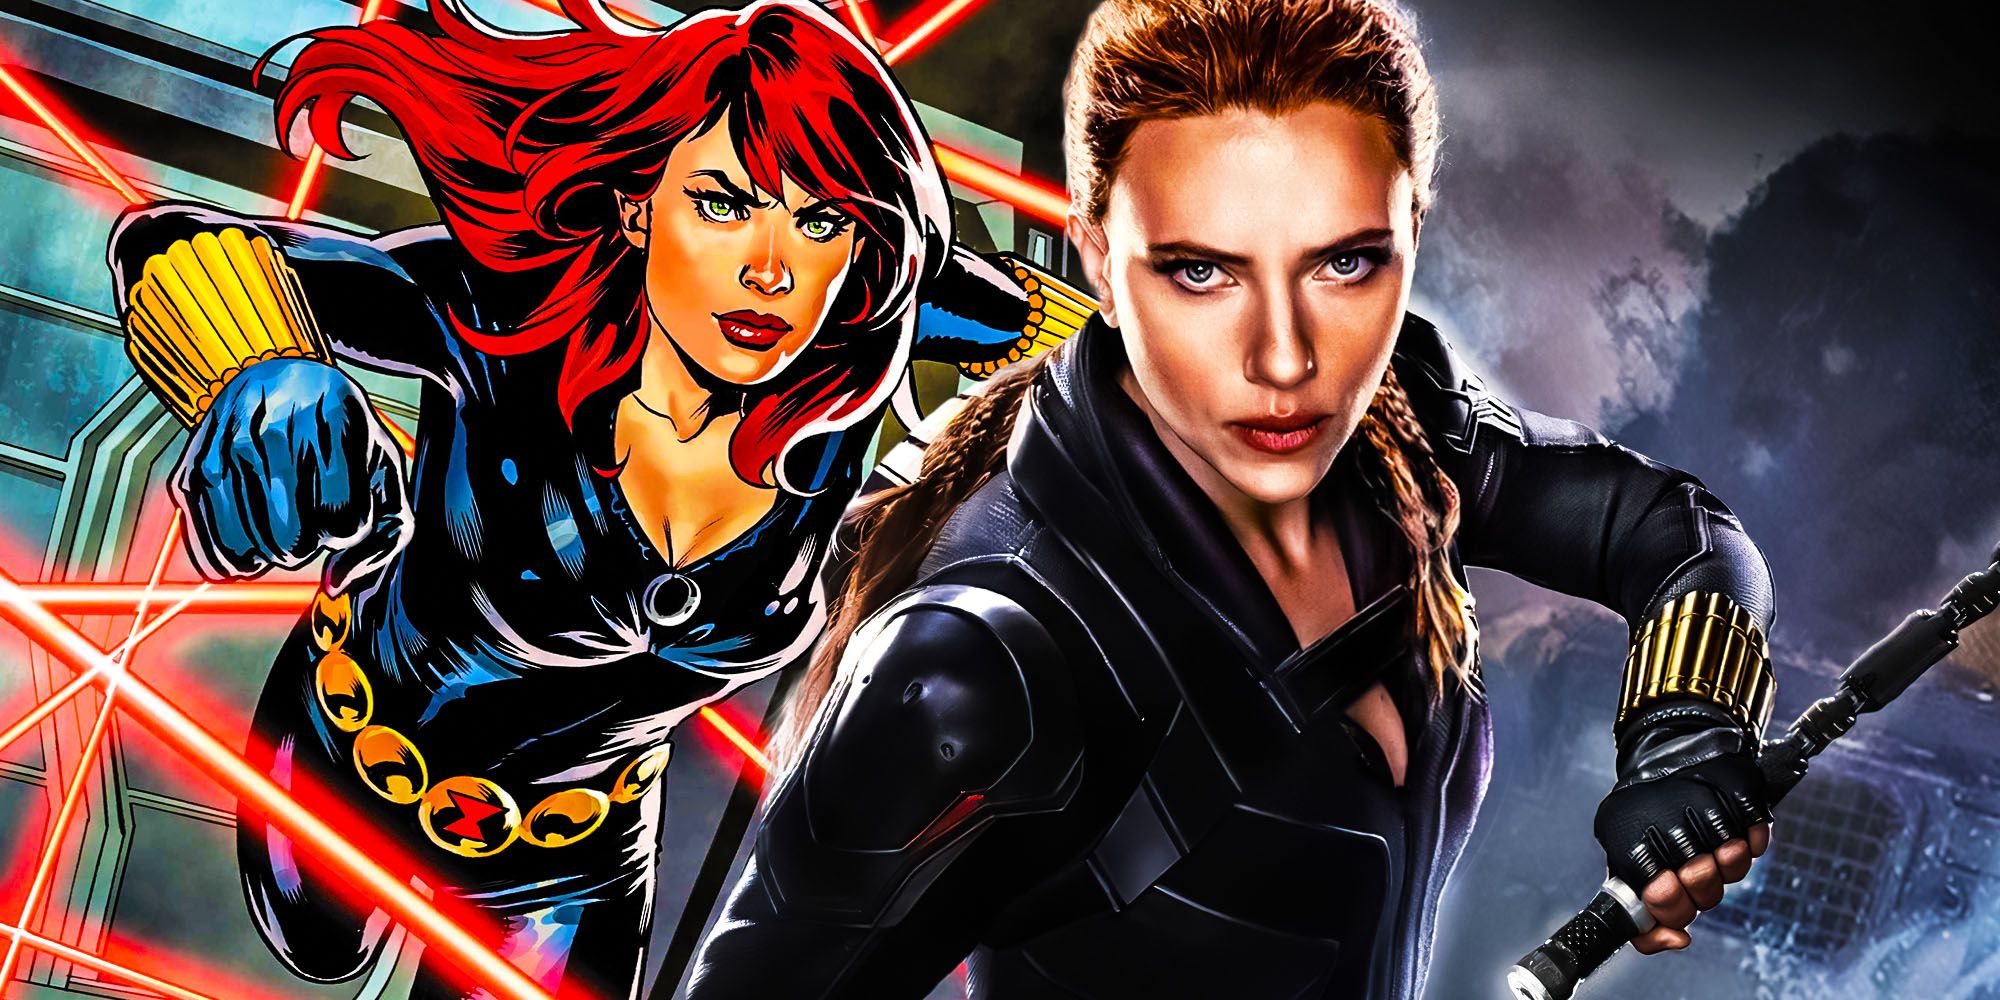 Black Widows Movie Costume Has A Nod To Her Comic Book Roots